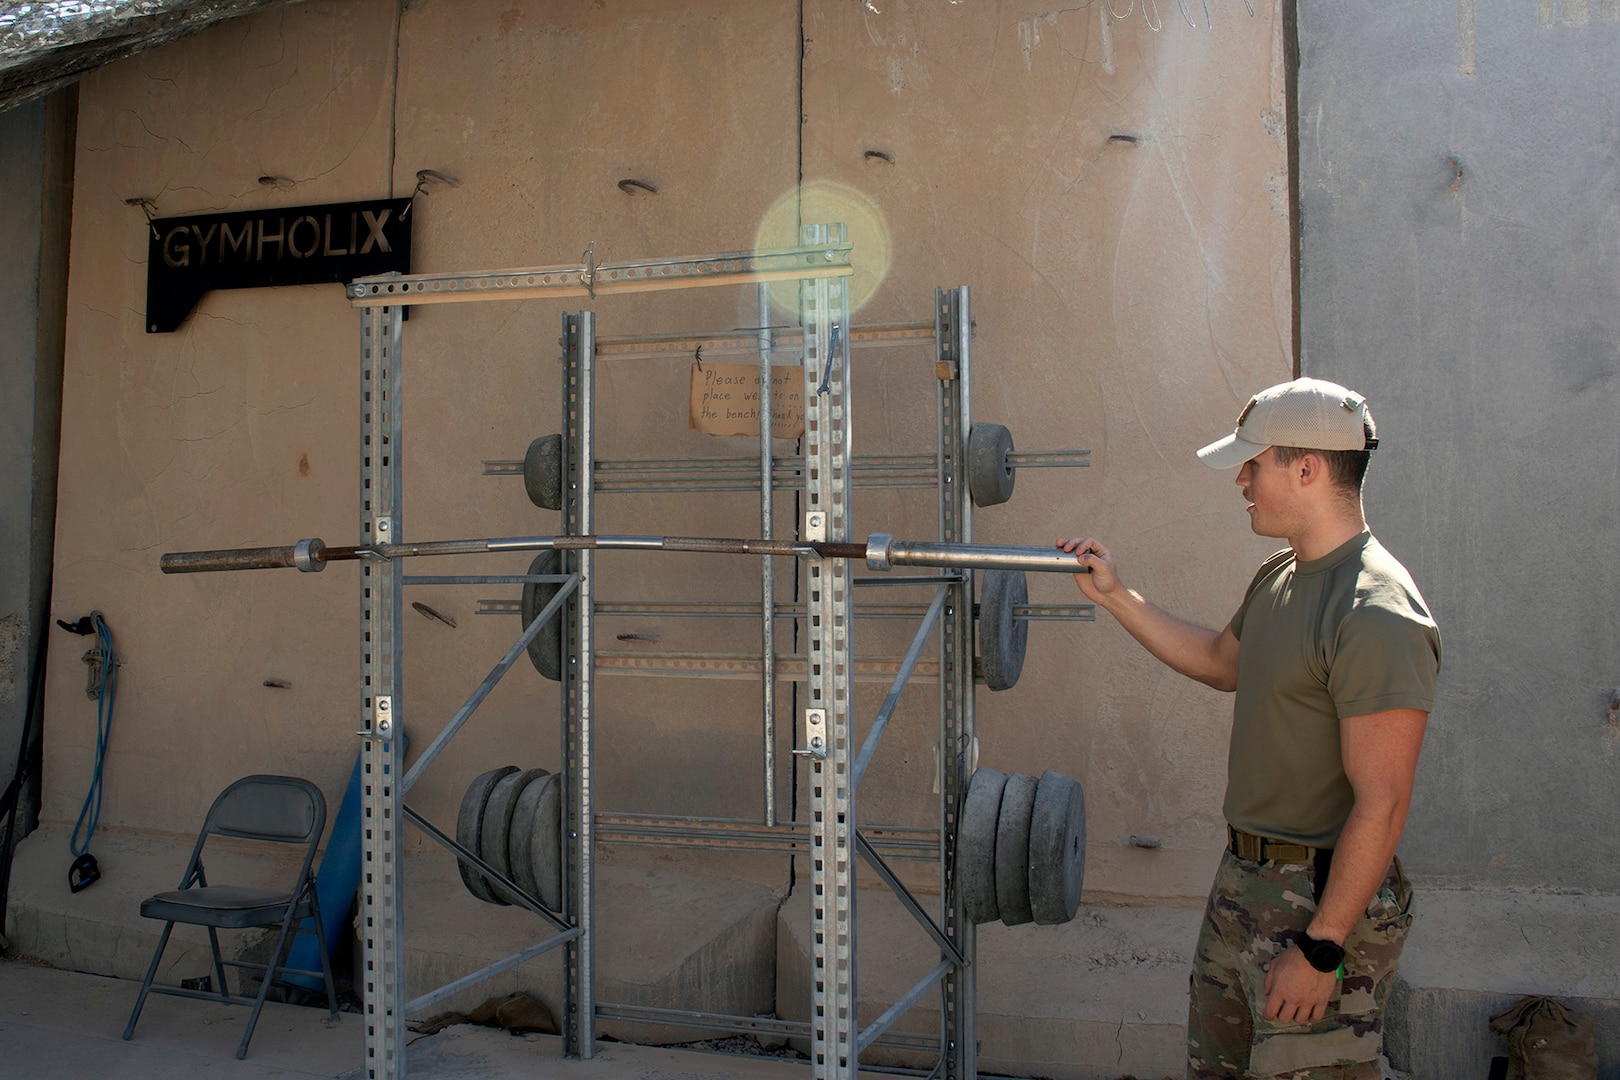 U.S. Army Spc. Kristian Kelly, a small arms artillery repair specialist from the 1st Battalion, 194th Field Artillery, shows off the handmade gym he and his fellow Soldiers built from concrete and scrap materials at the site of their Counter-Rocket, Artillery, Mortar gun at Al Asad Air Base, Iraq, on June 7, 2021. Kelly spent around 2,500 hours inside the small, secure compound, ensuring the operability of the C-RAM as part of a vital air defense mission to protect Al Asad from enemy rockets and drones. (U.S. Army National Guard photo by Sgt. 1st Class Christie R. Smith)